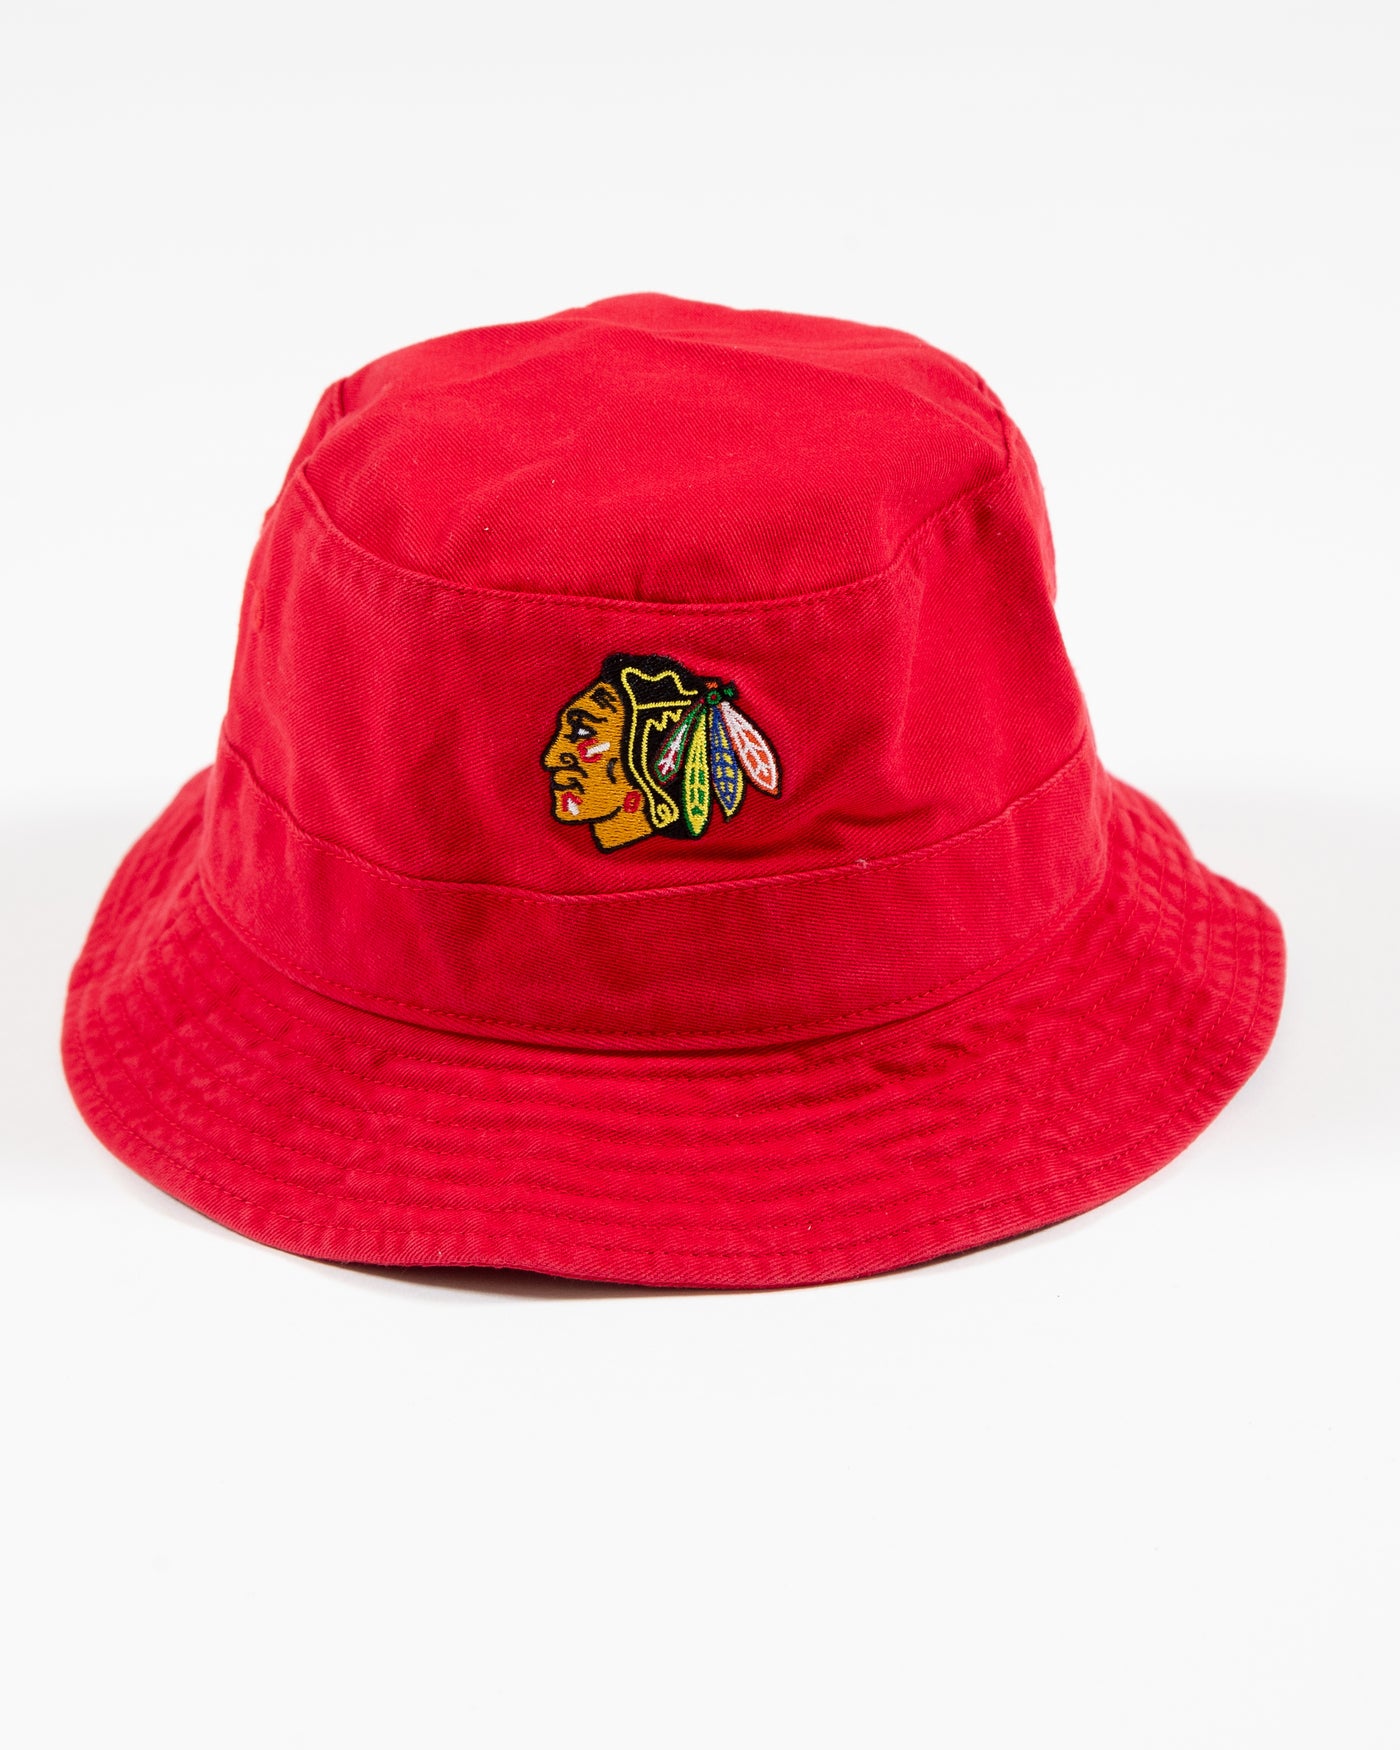 red '47 bucket hat with Chicago Blackhawks primary logo embroidered on front - front lay flat